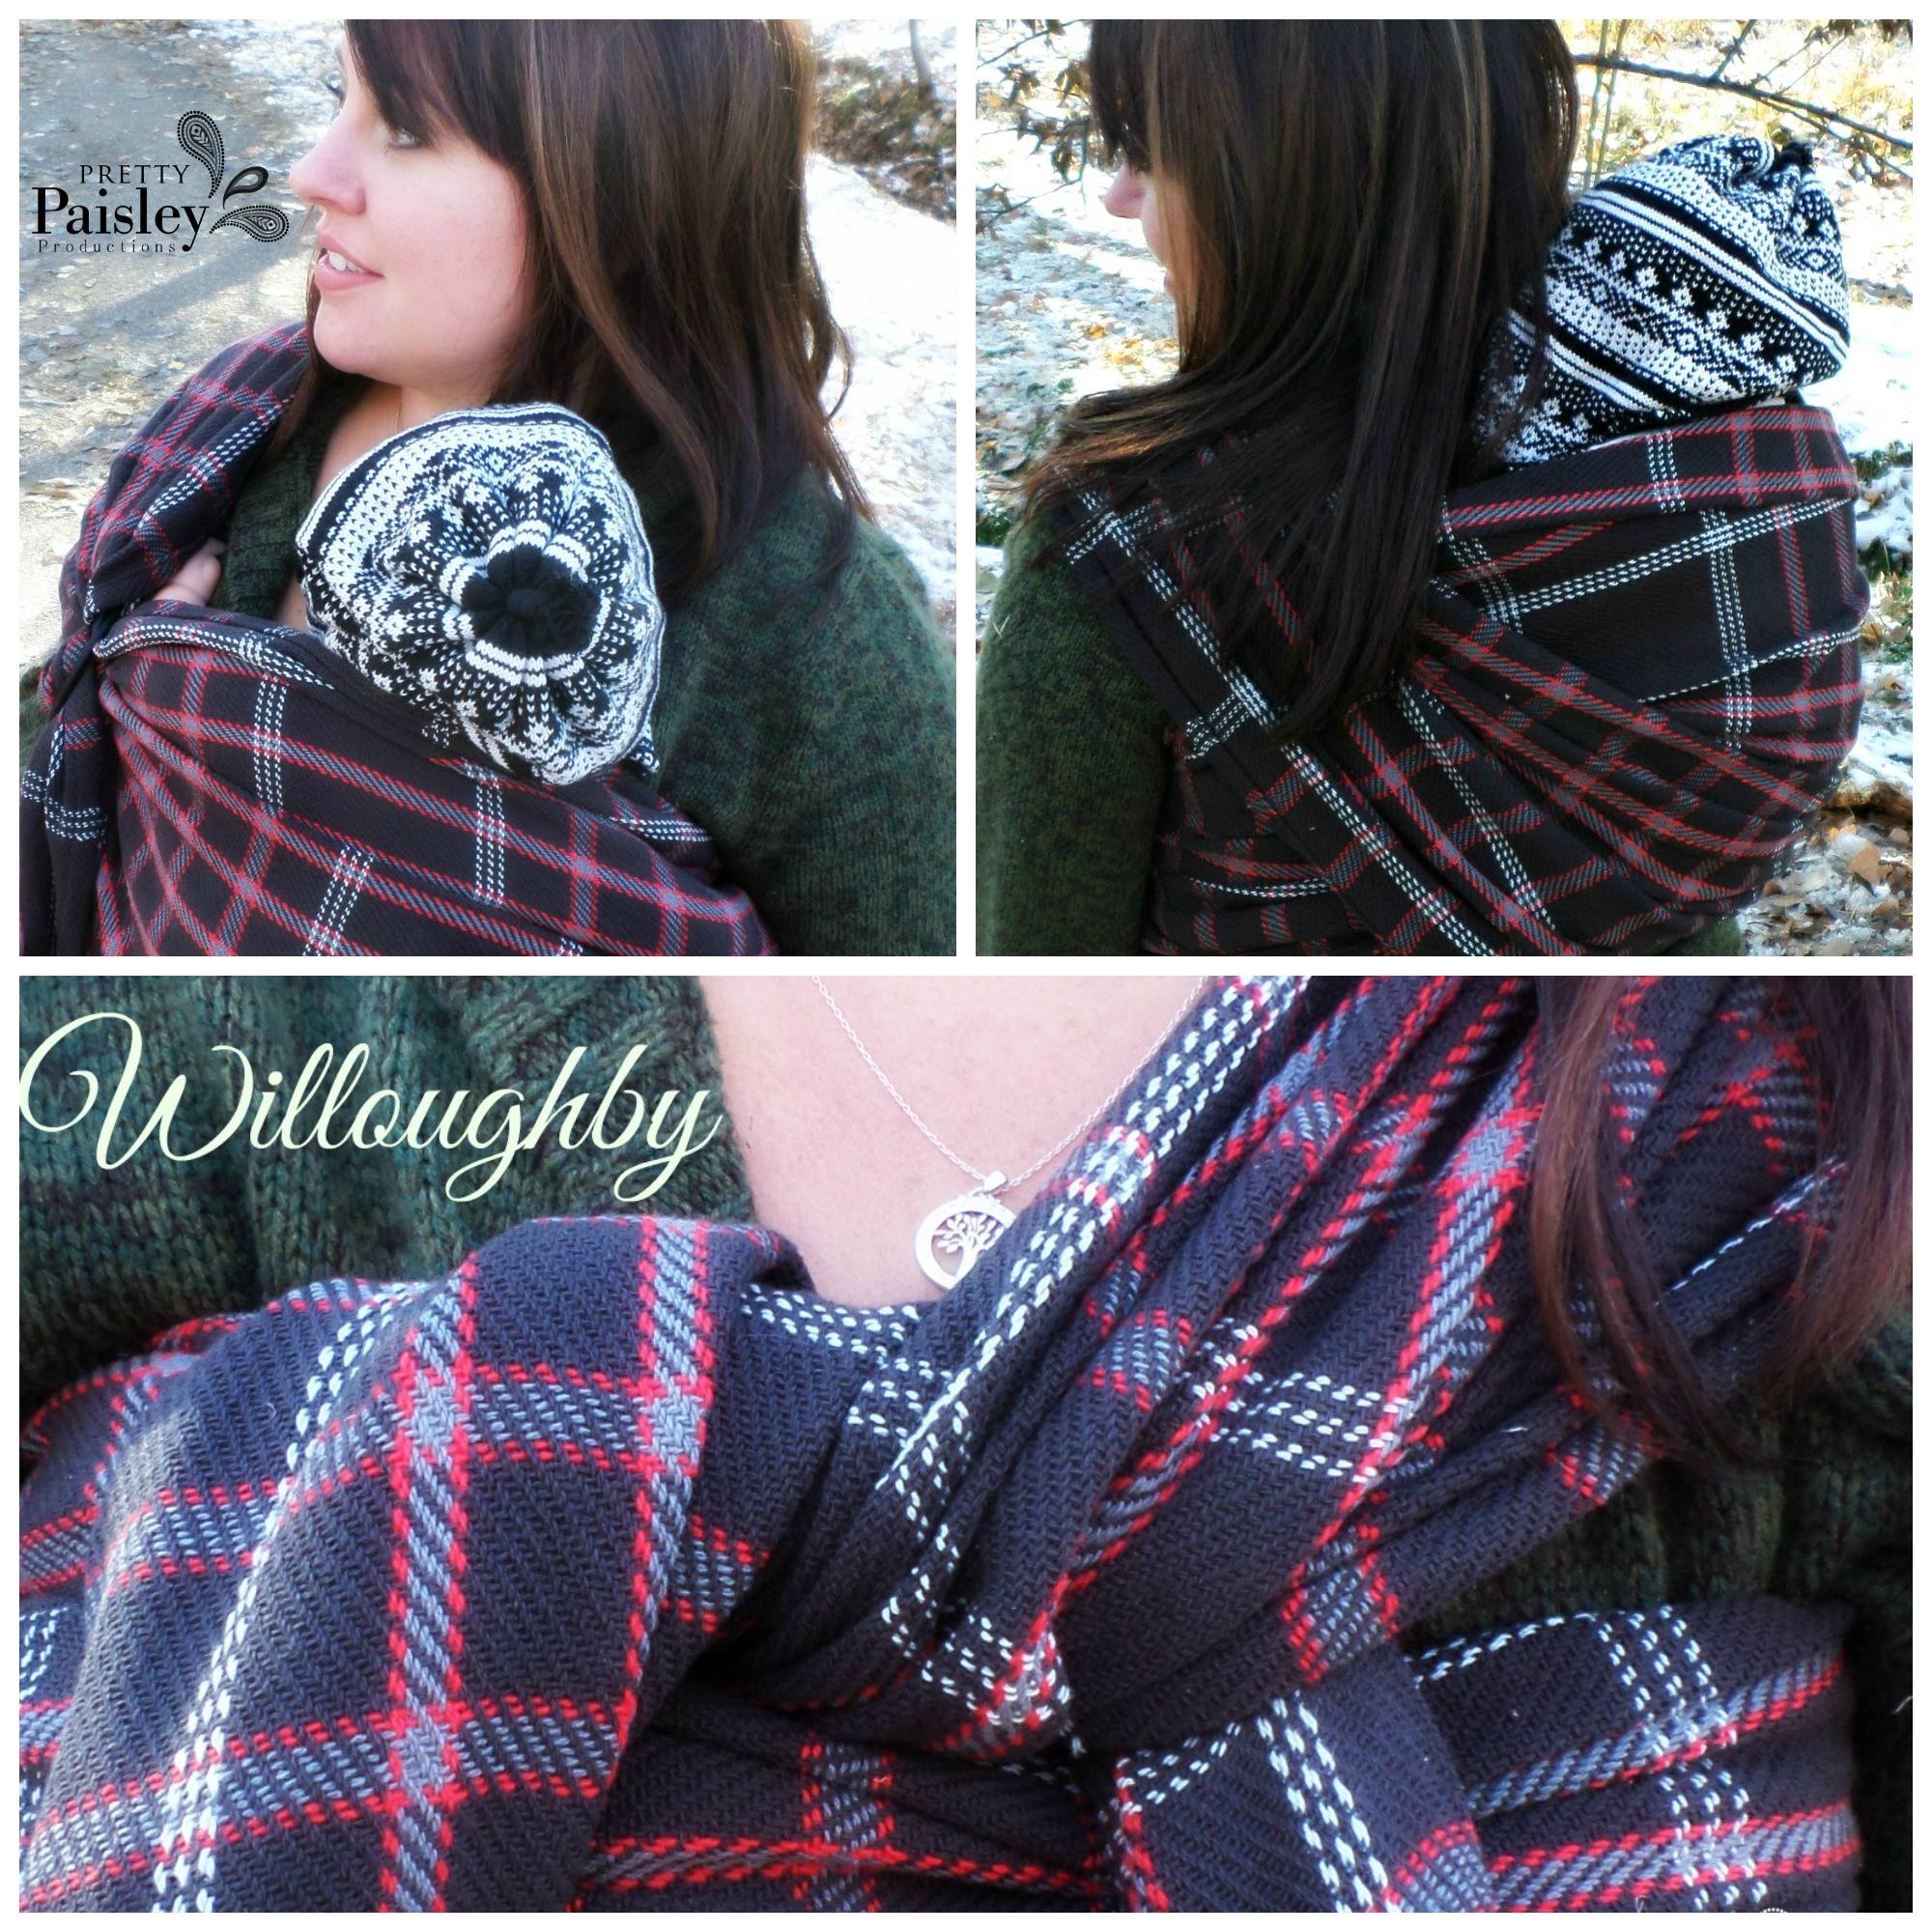 Tragetuch Pretty Paisley Production checkered WILLOUGHBY  Image